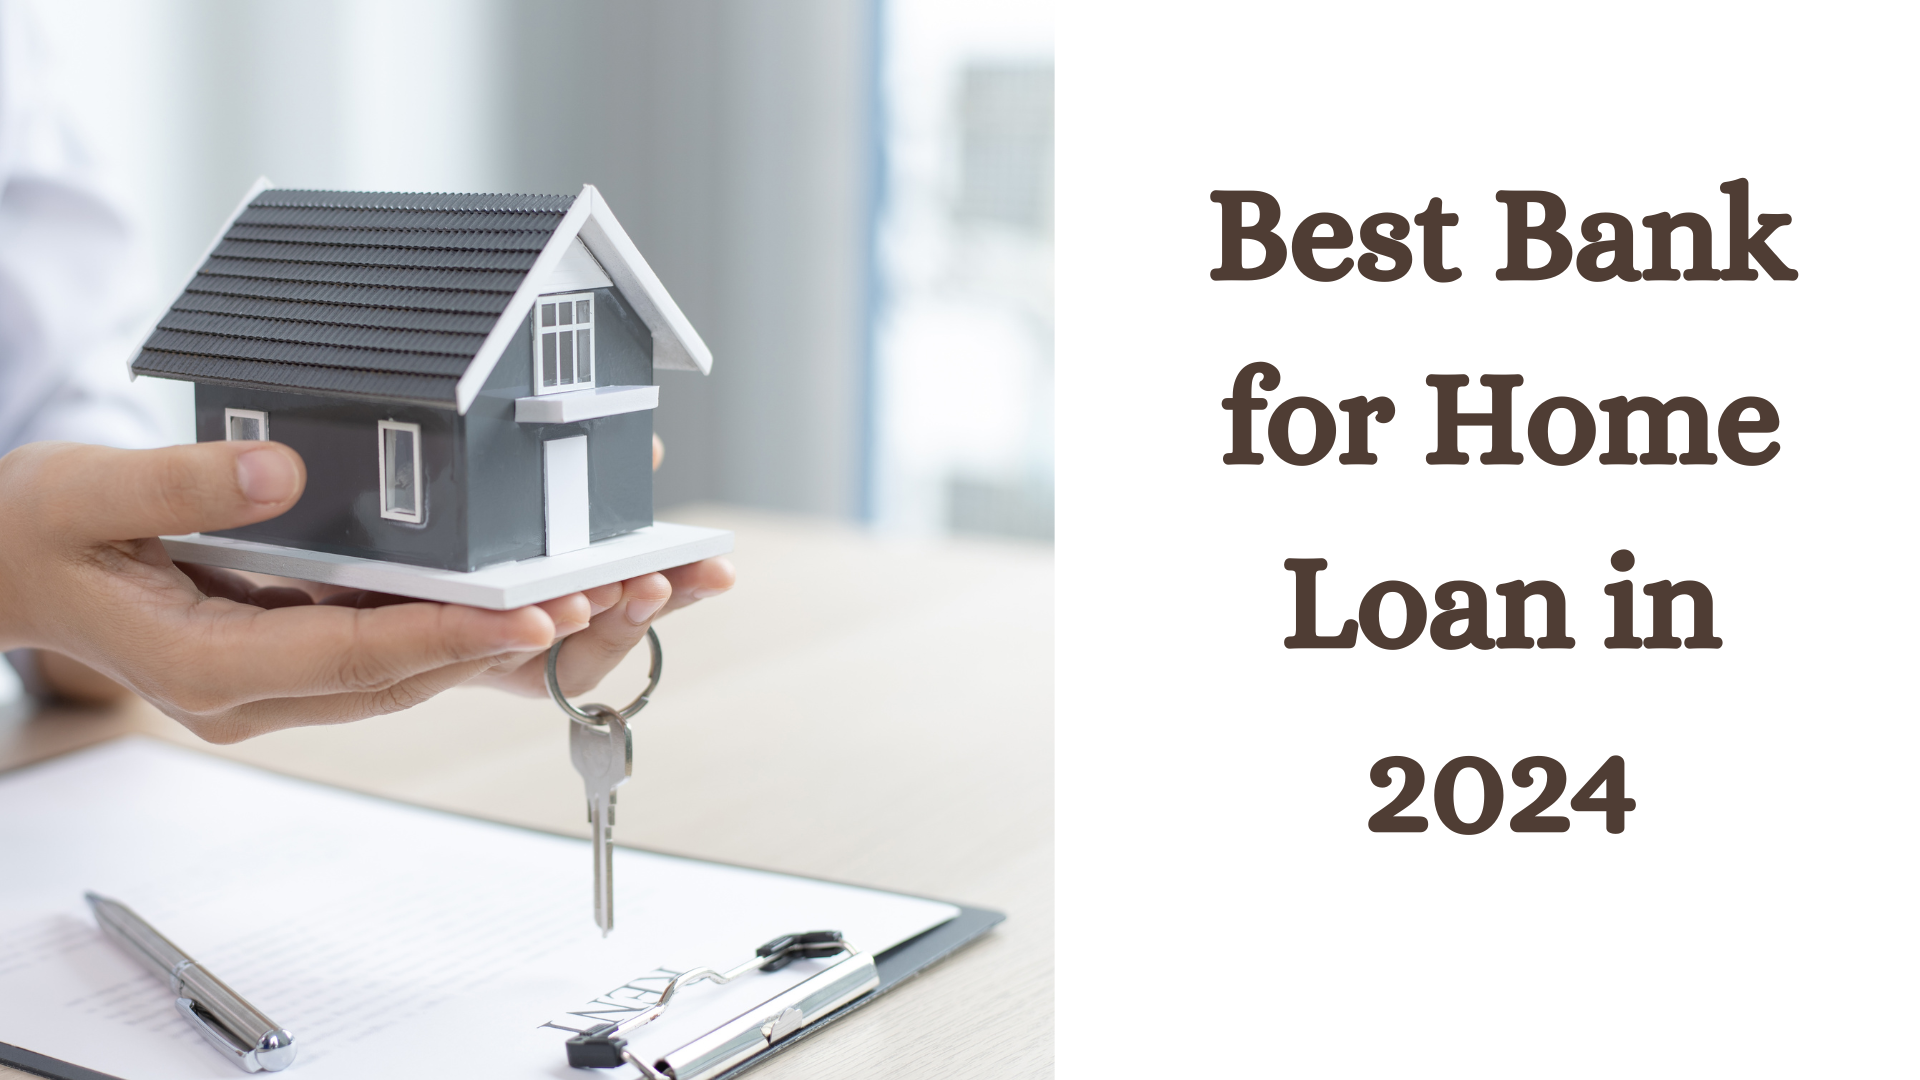 Best Bank for Home Loan in 2024